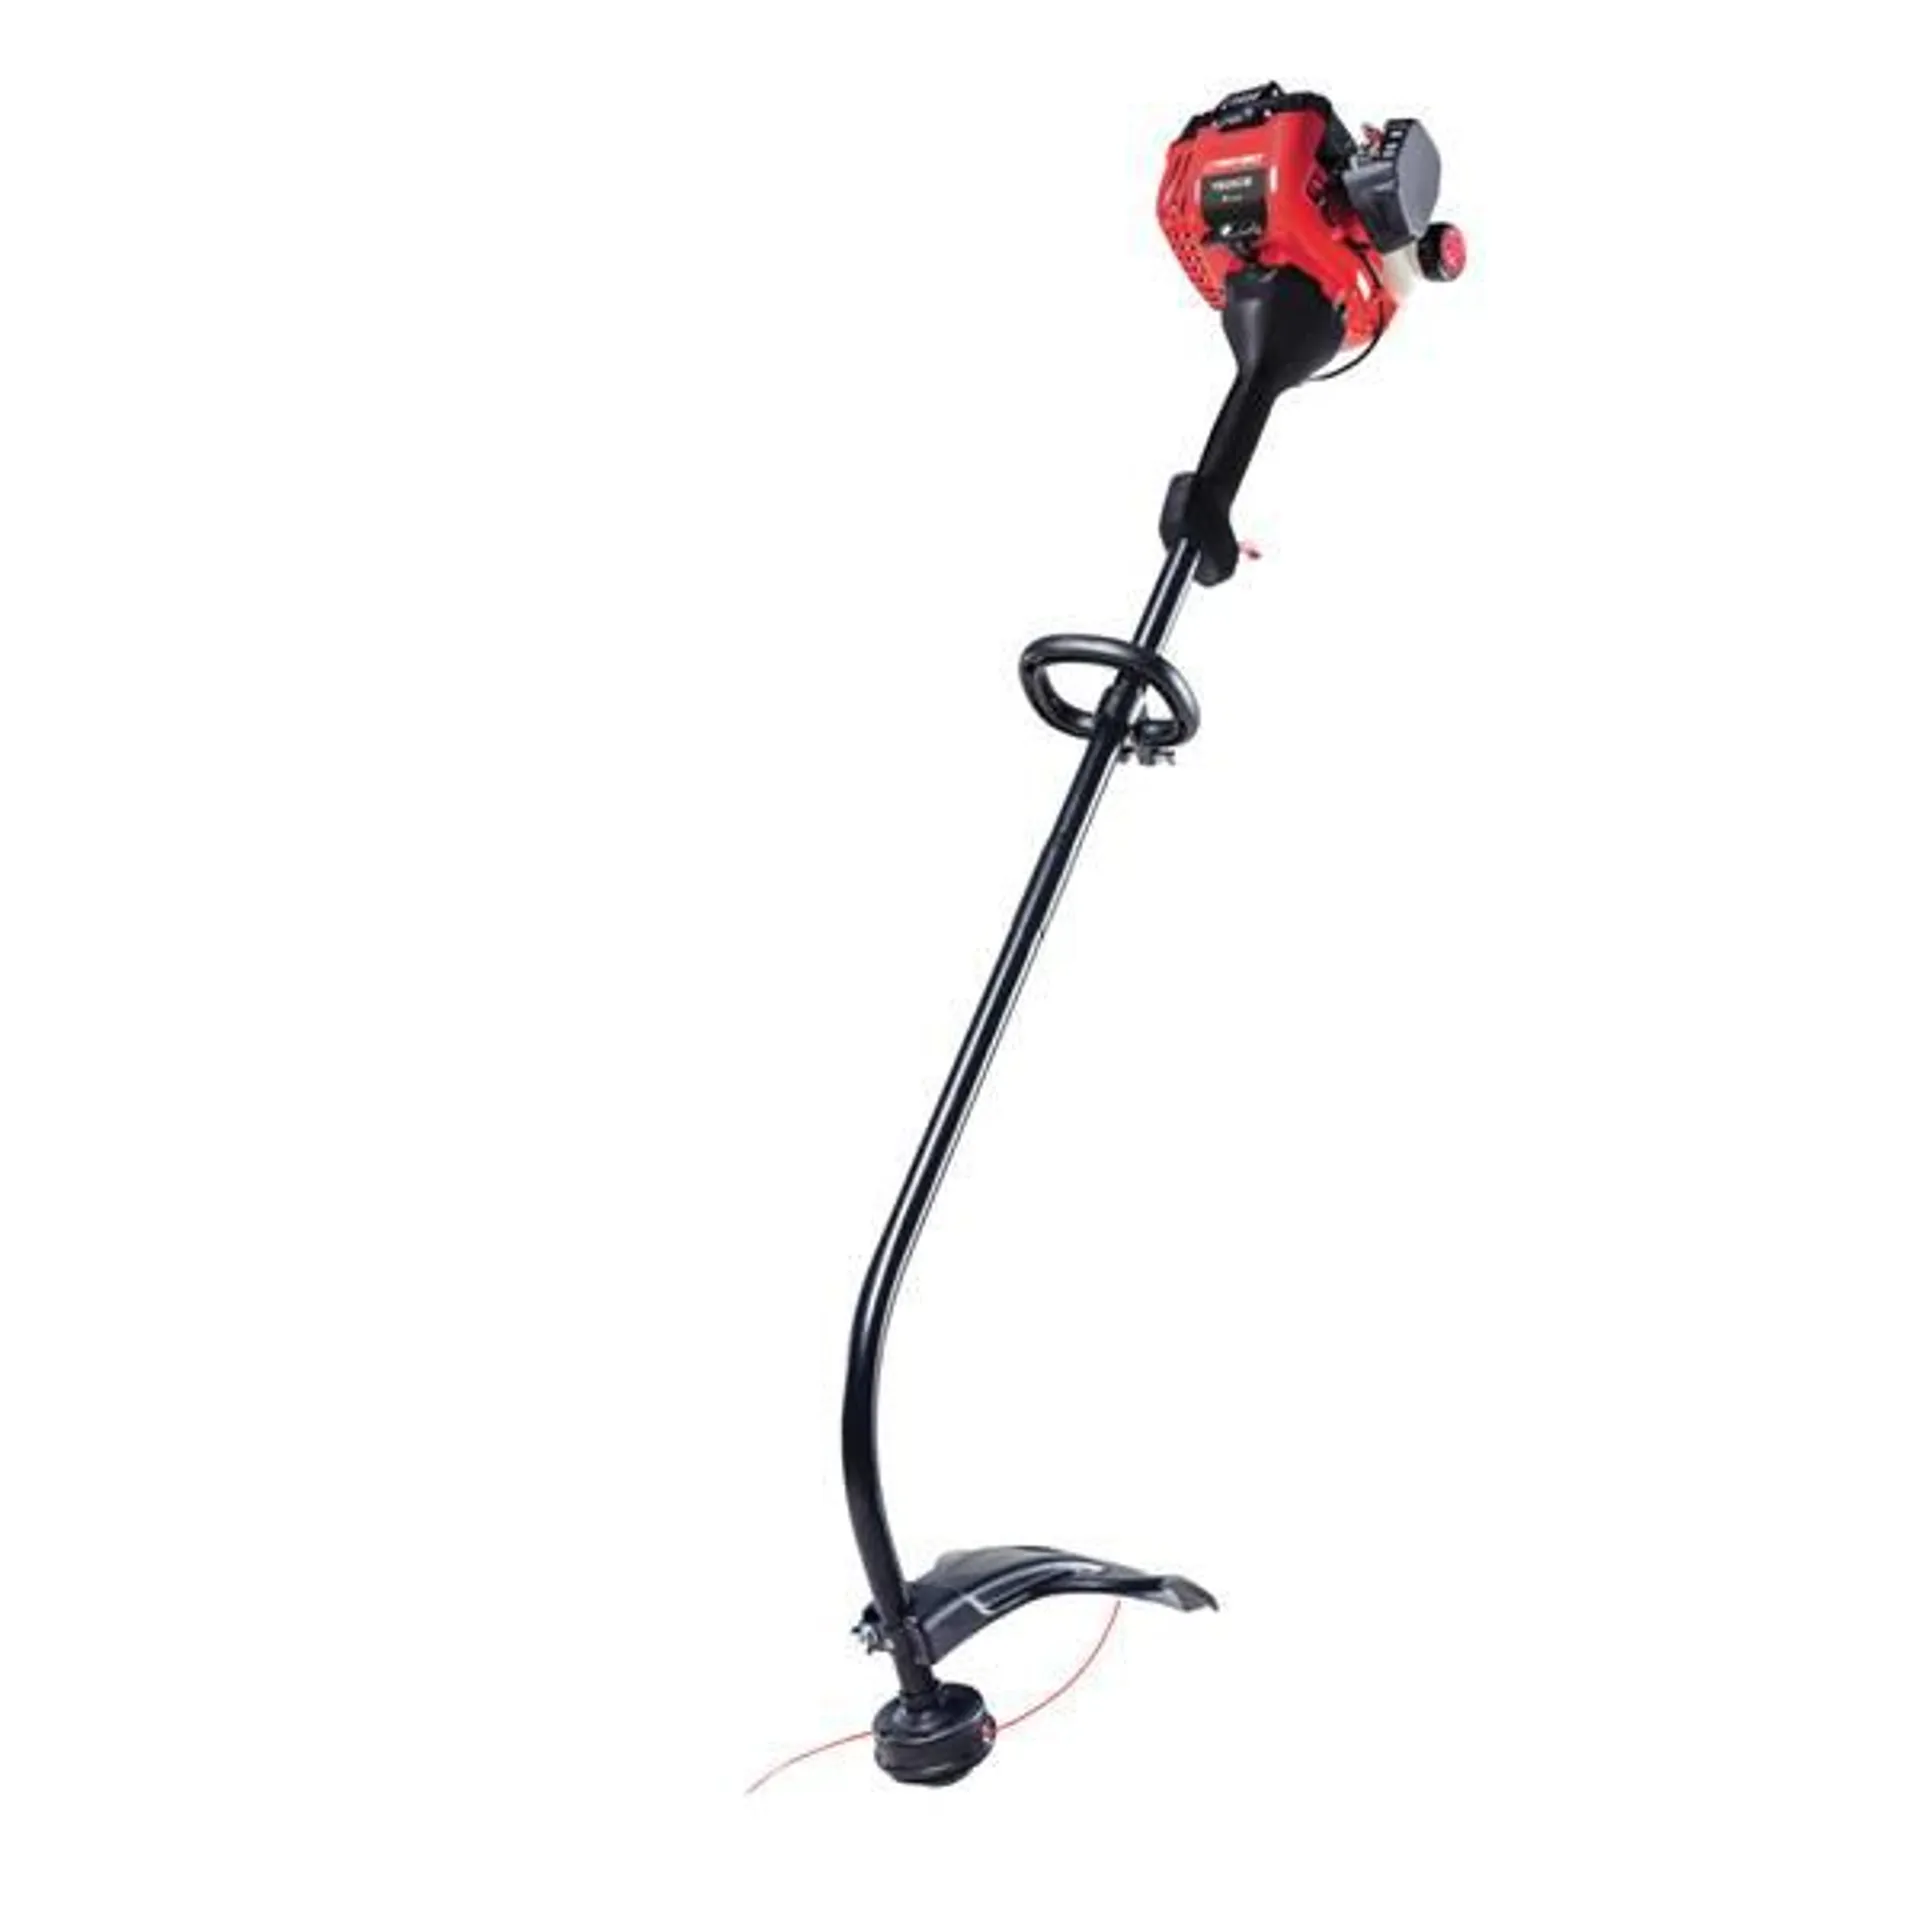 25cc 16" Curved Shaft Gas String Trimmer